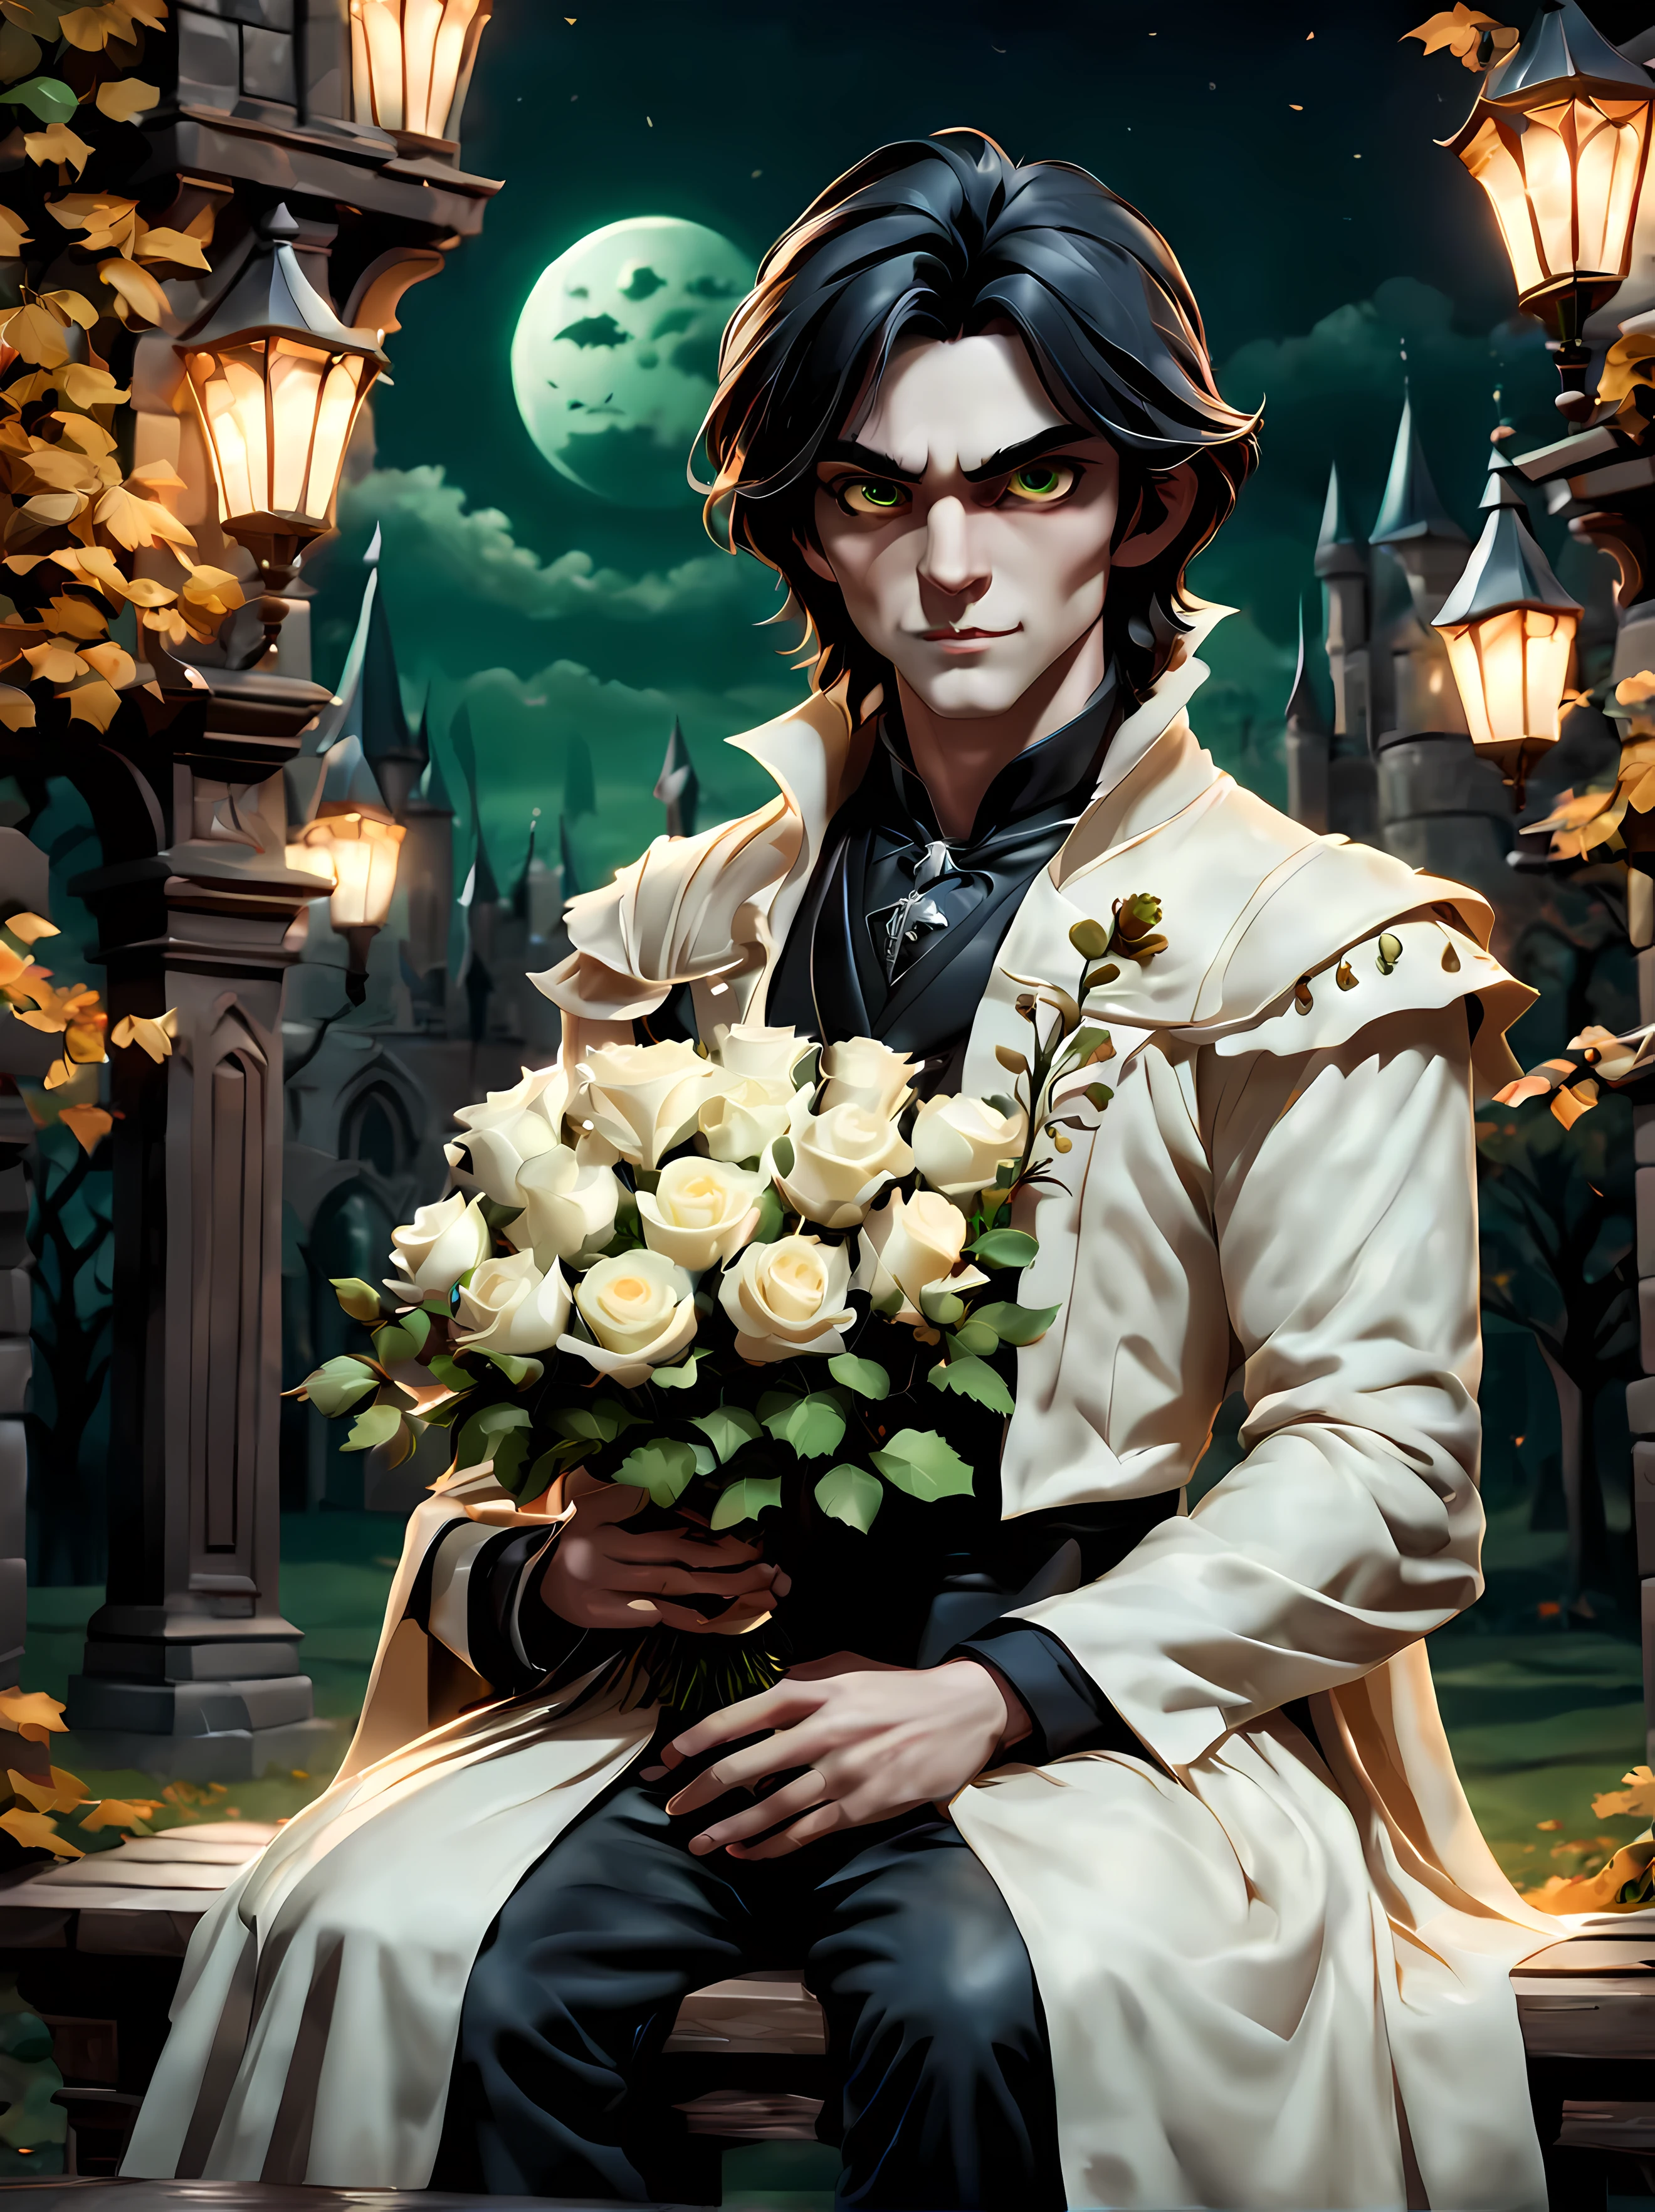 3D 渲染风格, 3D渲染AF, Perfect HAnds, MAsterpiece in mAximum 16K resolution, (cute cArtoon style:1.3), A (((独自的))) mid shot of A hAndsome vAmpire (mAle) ((sitting on An elegAnt bench)) in A moonlit Autumn gArden, (complex rich gothic pAtterns with golden lines), the vAmpire is weAring An elegAnt flowing gown, he hAs (鲜绿色的眼睛), And long blAck hAir, (((holding A bouquet of white roses in his hAnds, looking up with AnticipAtion))), gothic cAstle in the bAckground, 夜晚. | ((更多的_DetAil))